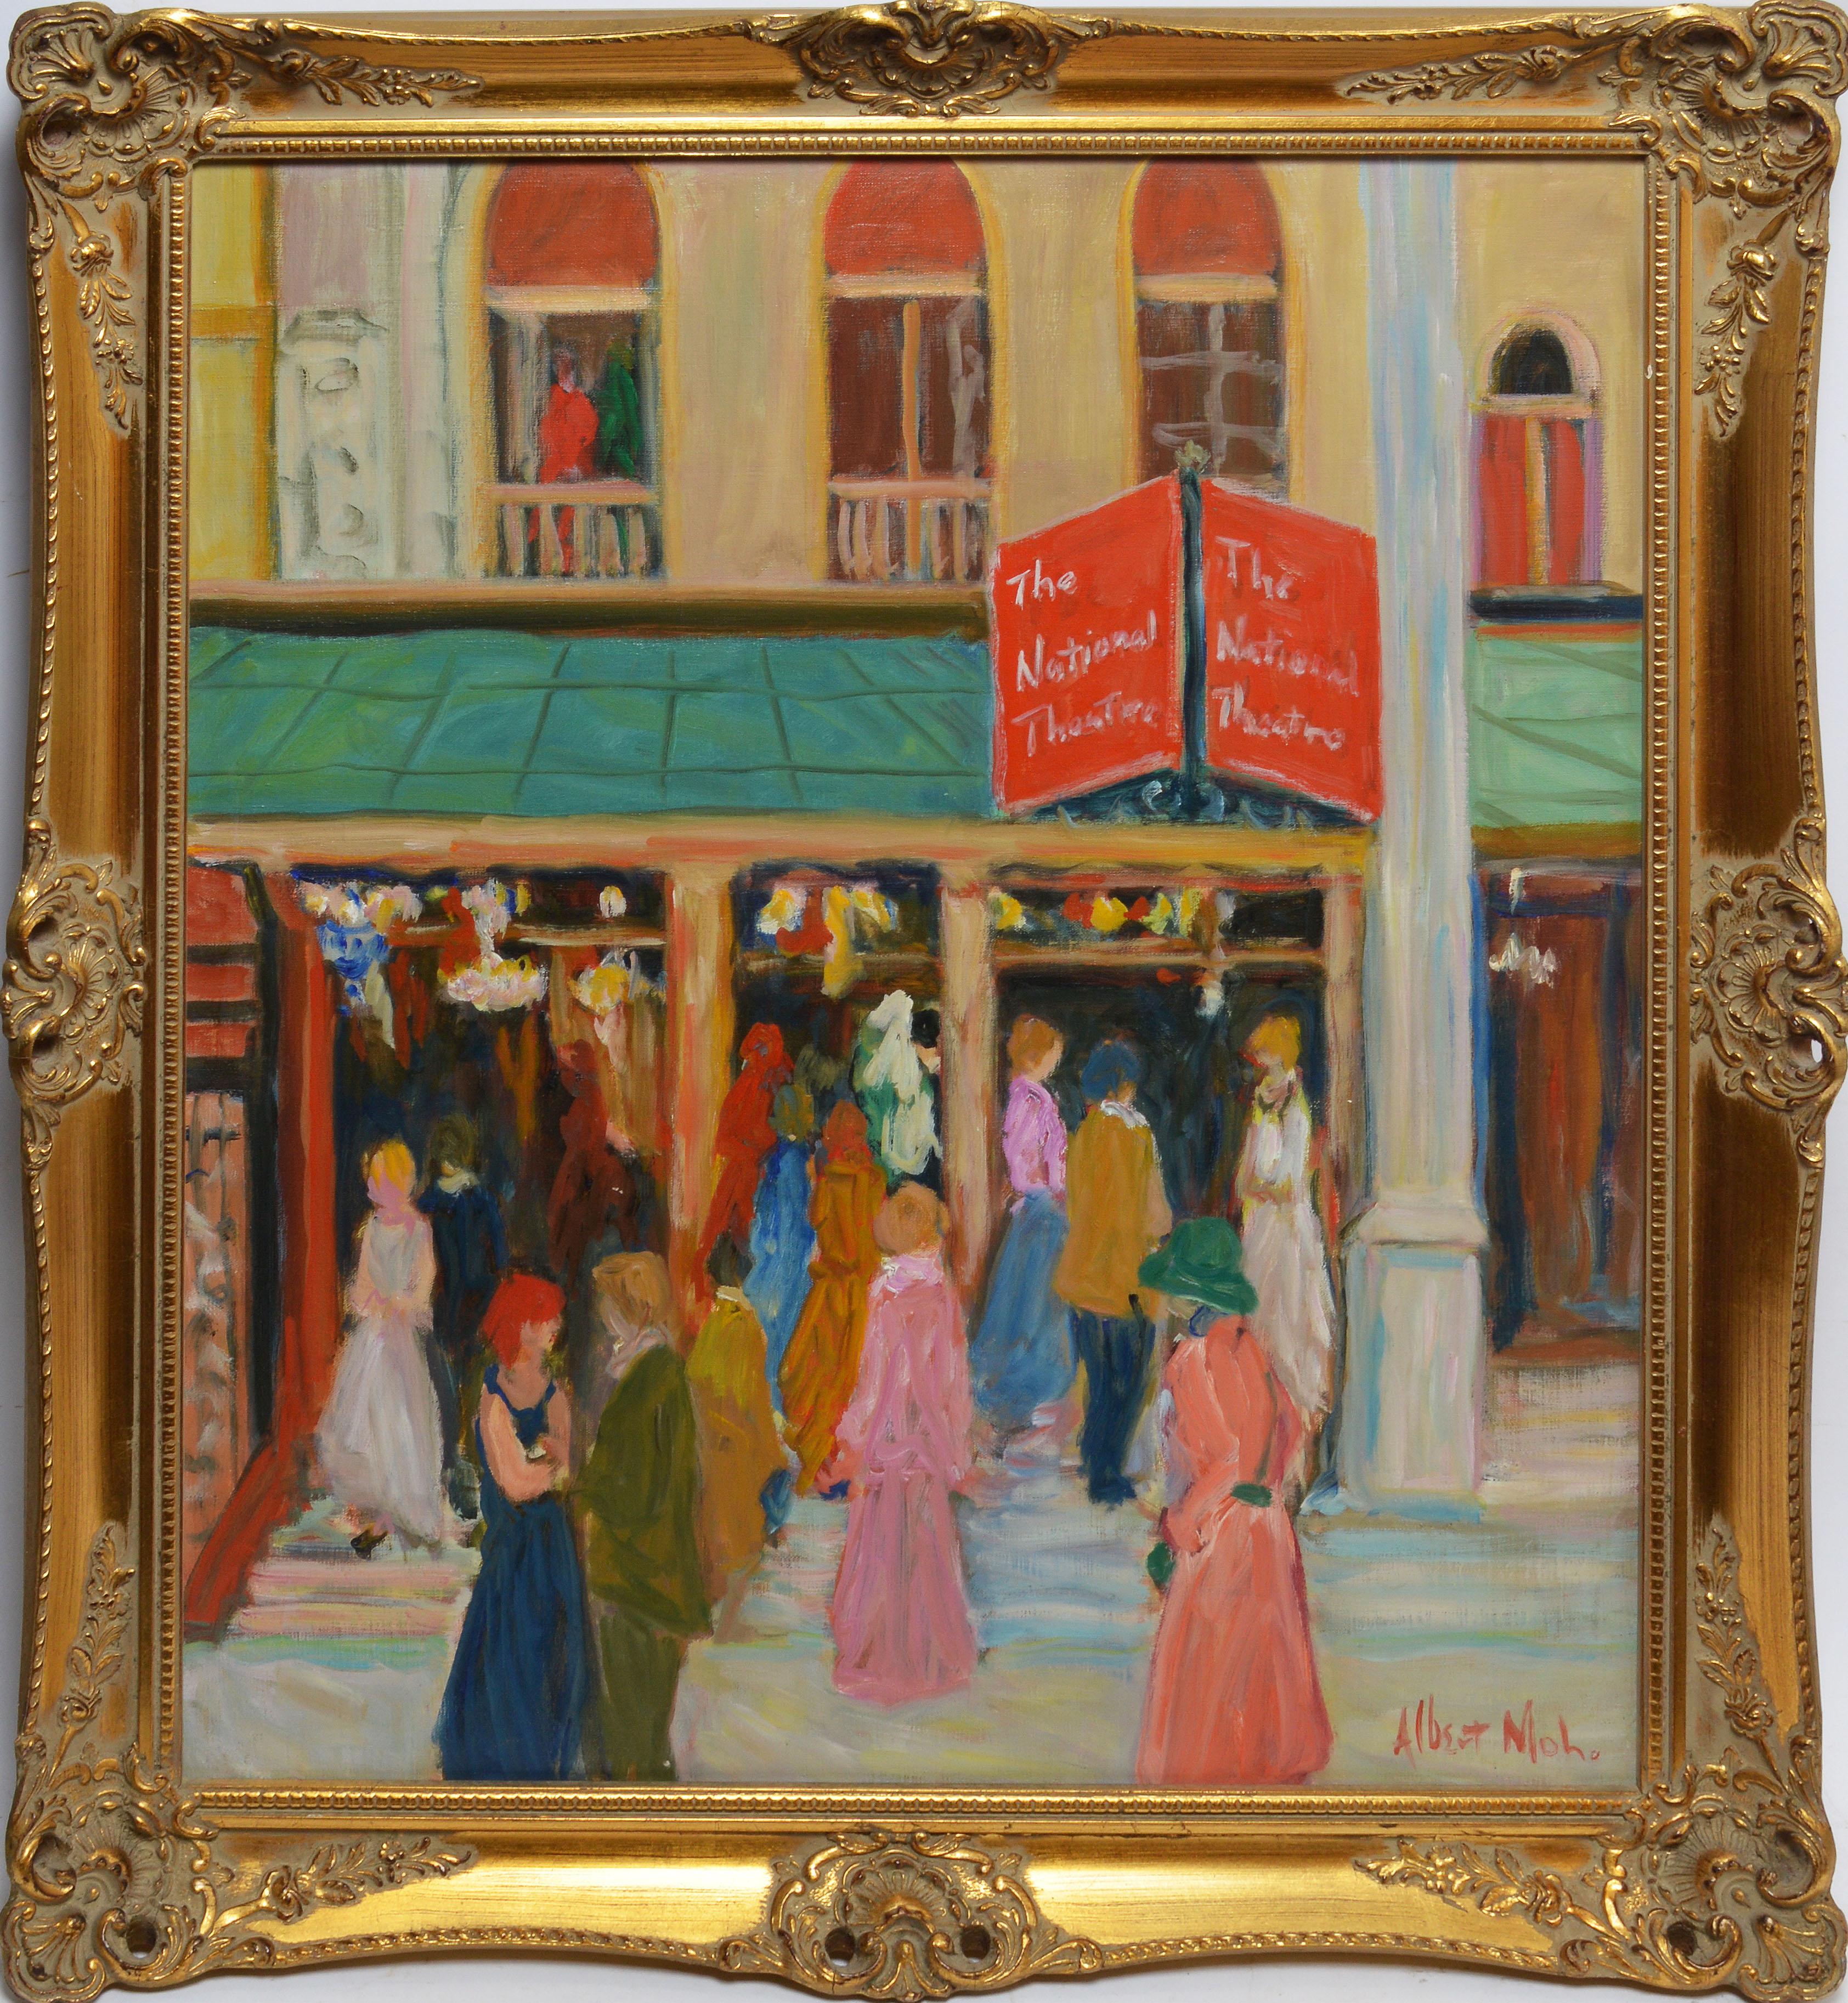 Impressionist city view of the National Theatre by Albert Mohr  (born 1918).  Oil on canvas, circa 1950.  Signed.  Displayed in a giltwood frame.  Image size, 24"H x 20"L, overall 28"H x 24"L. 